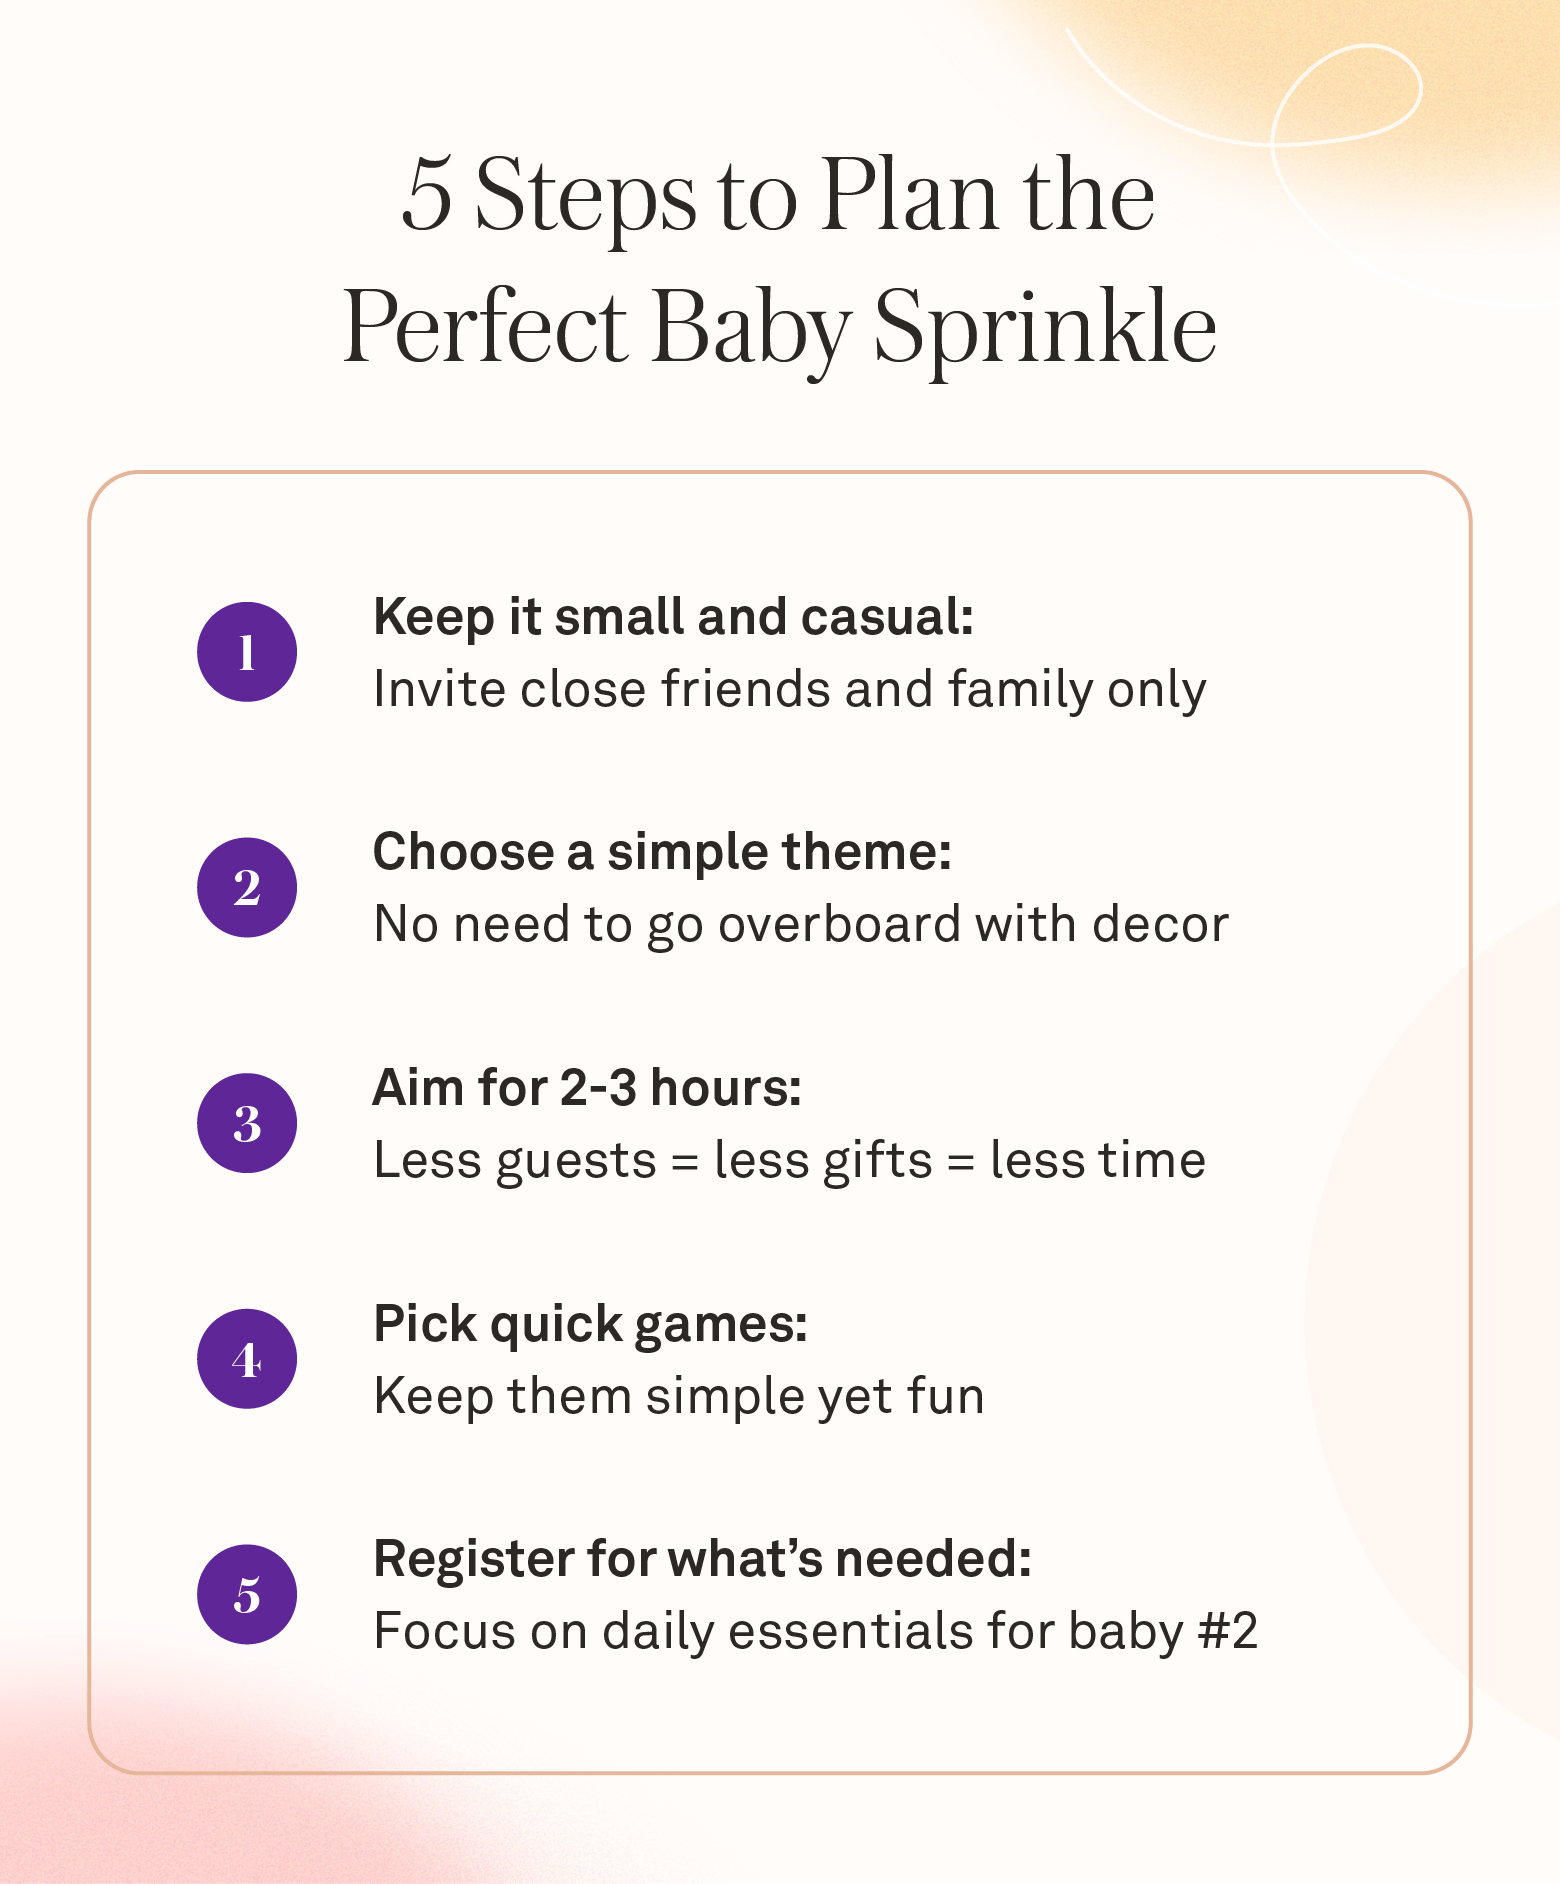 5 steps to plan a baby sprinkle